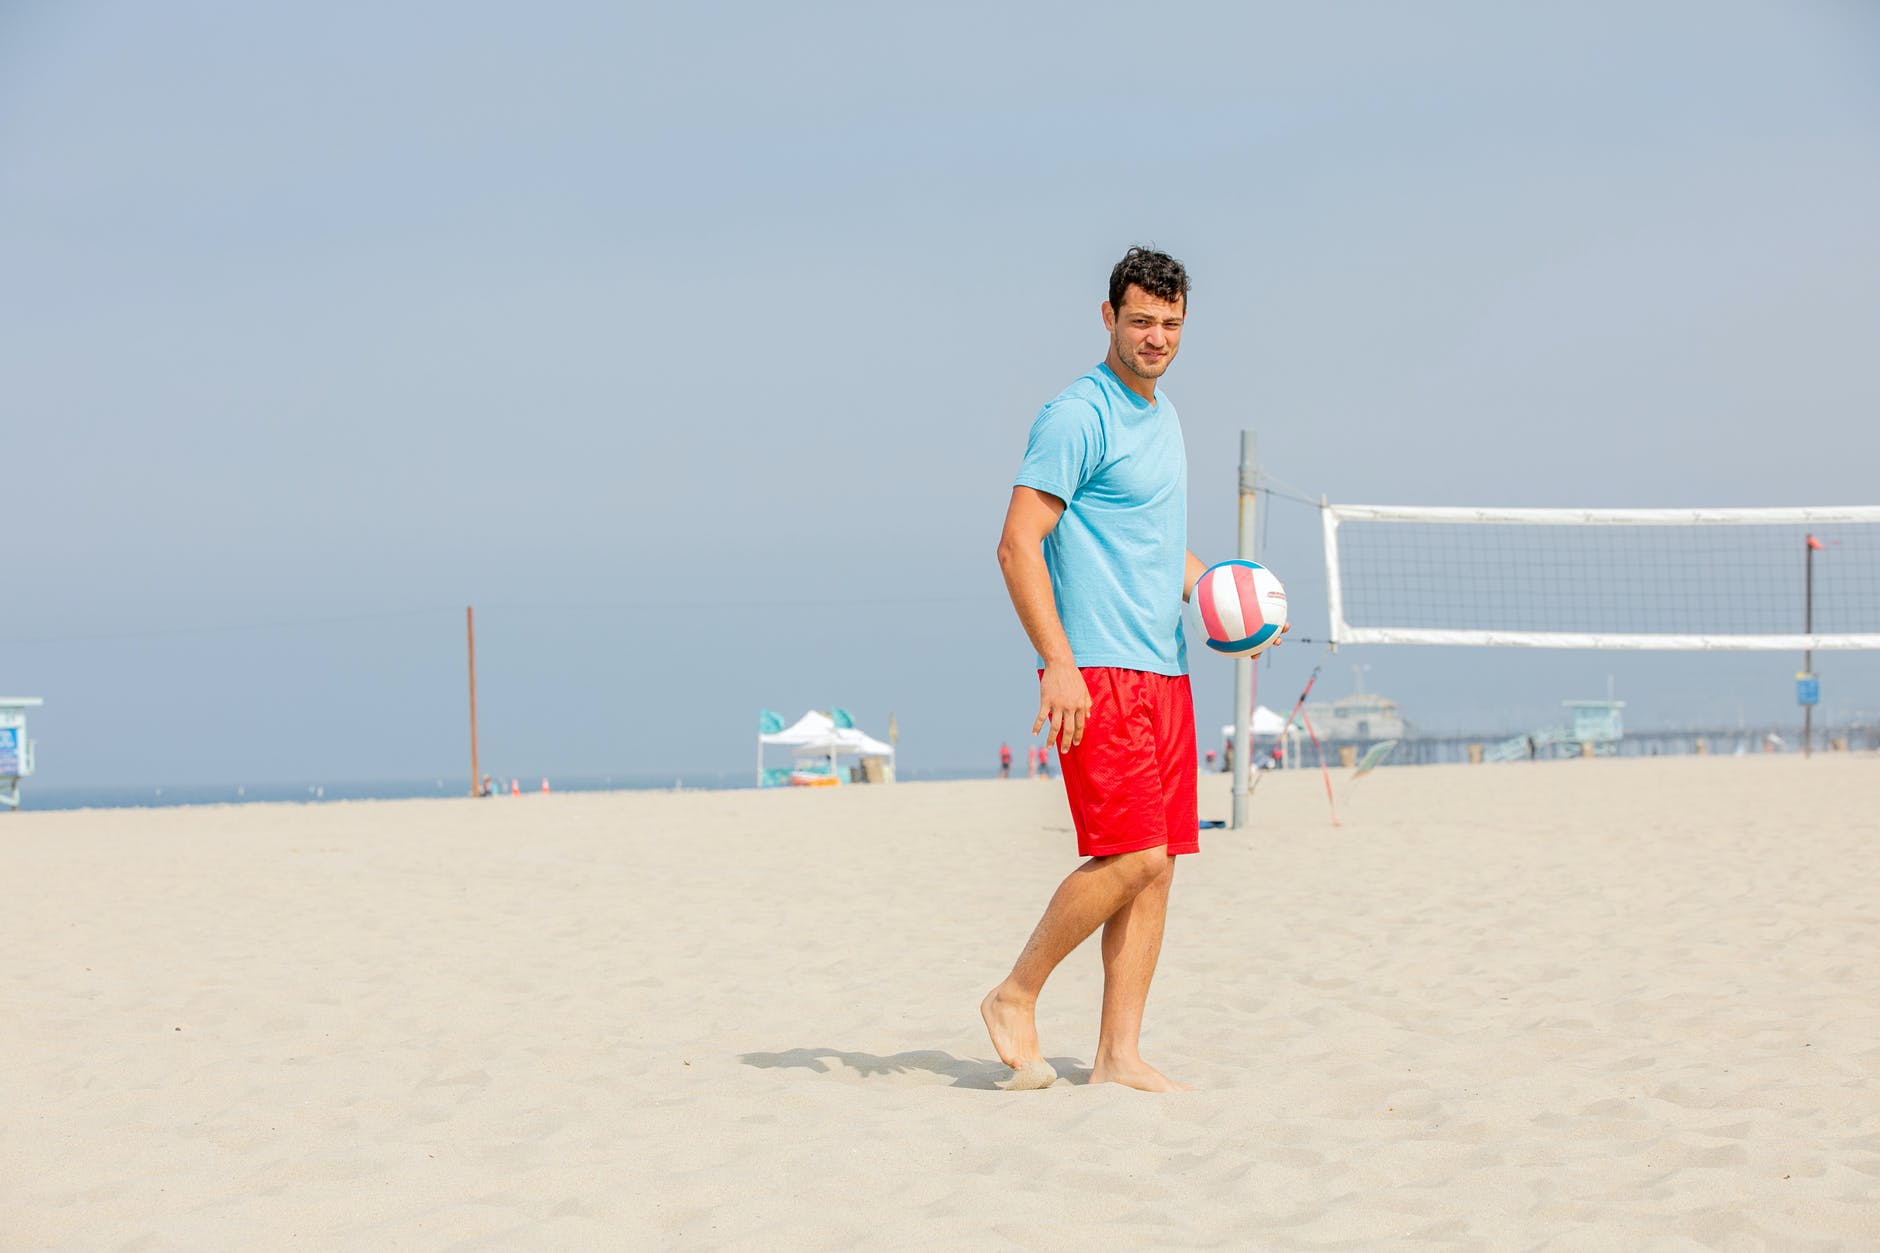 young man getting ready to serve ball on beach